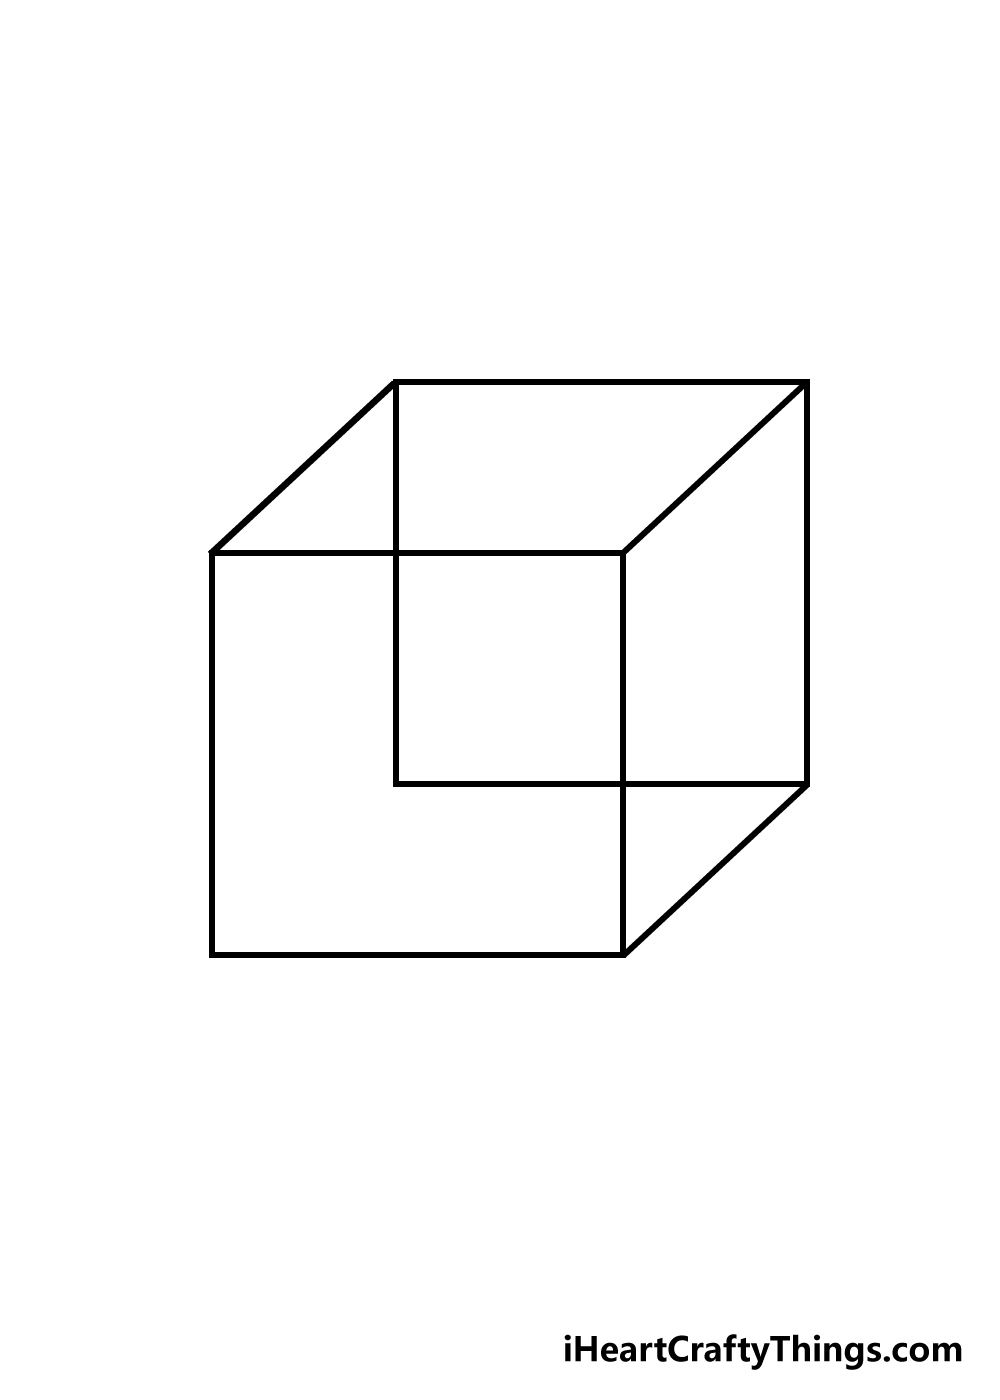 Draw a Museum. It is a Cube